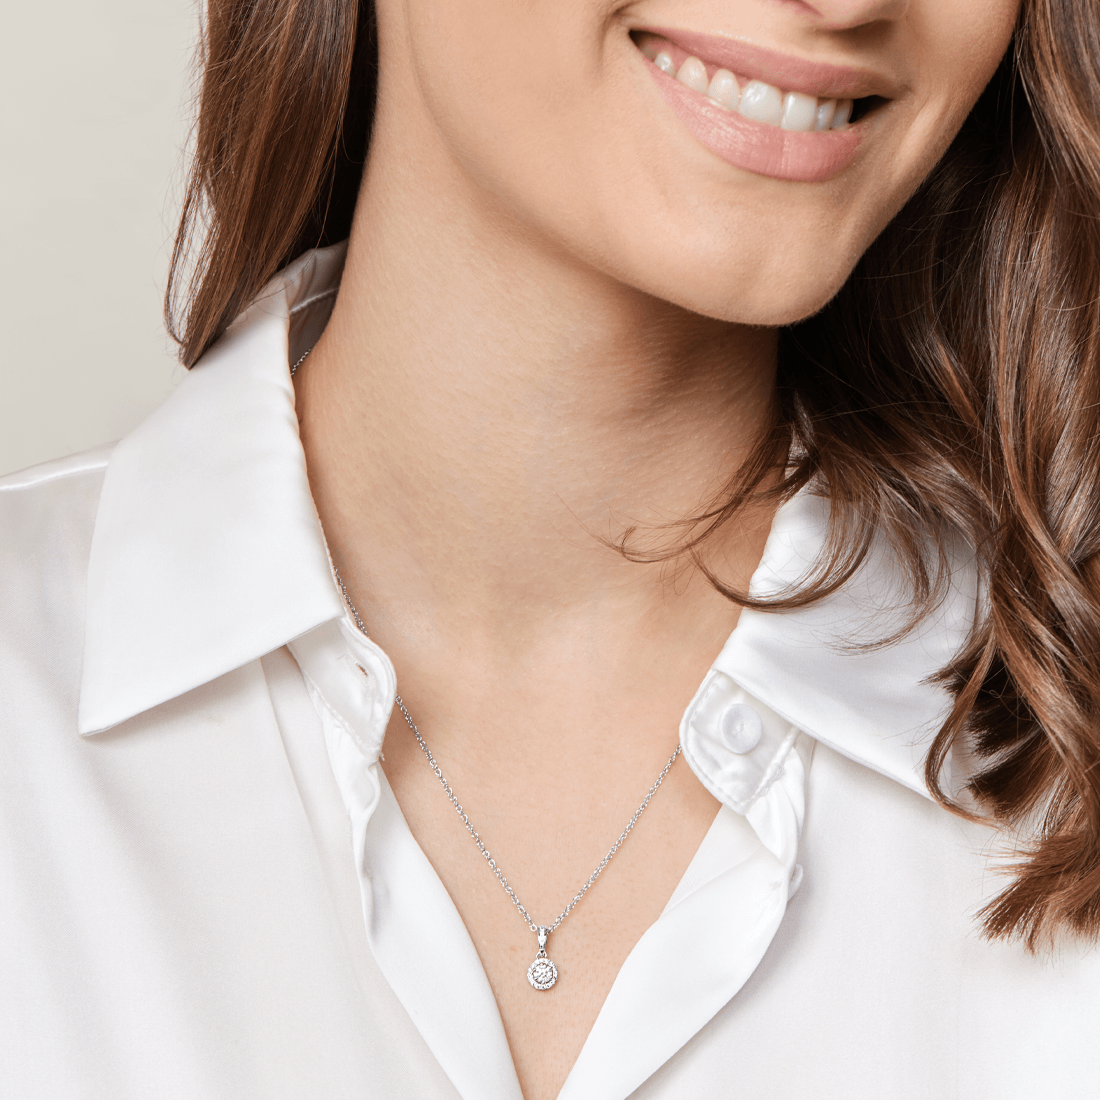 Love by Michelle Beville Halo Solitaire Necklace with 0.40ct of Diamonds in 18ct White Gold Necklaces Bevilles 